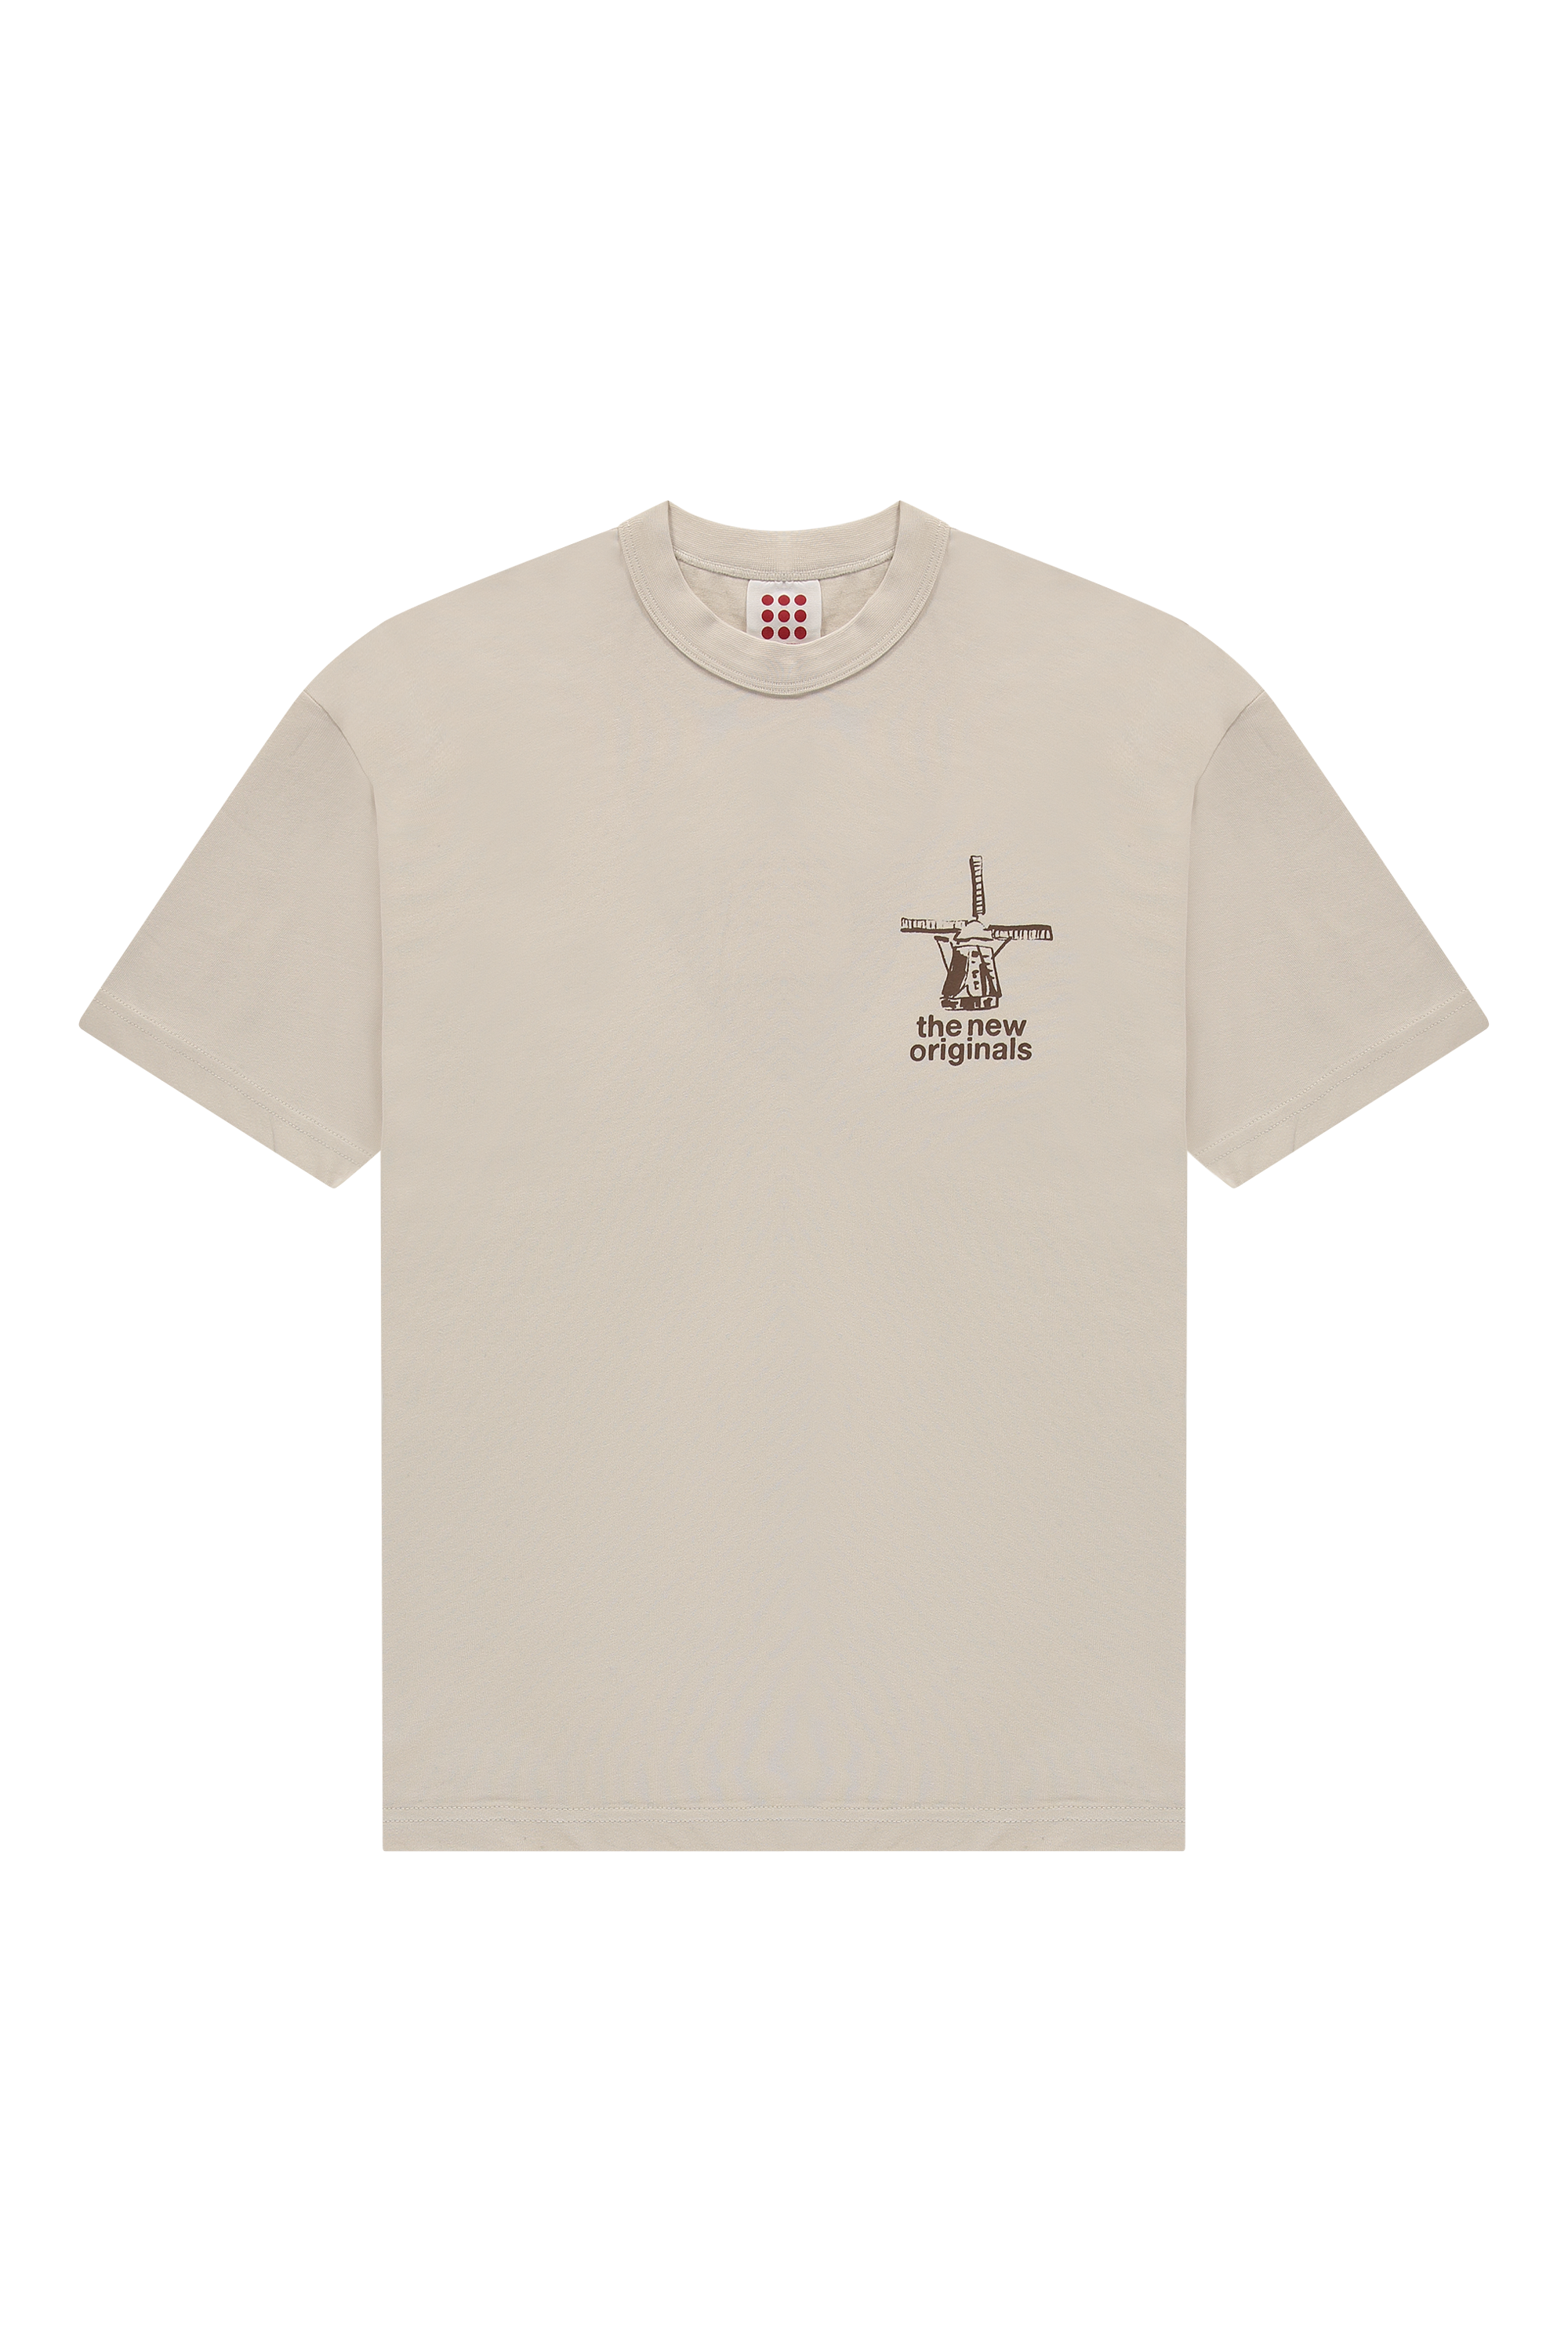 files-molen_tee_white_sand_front-png